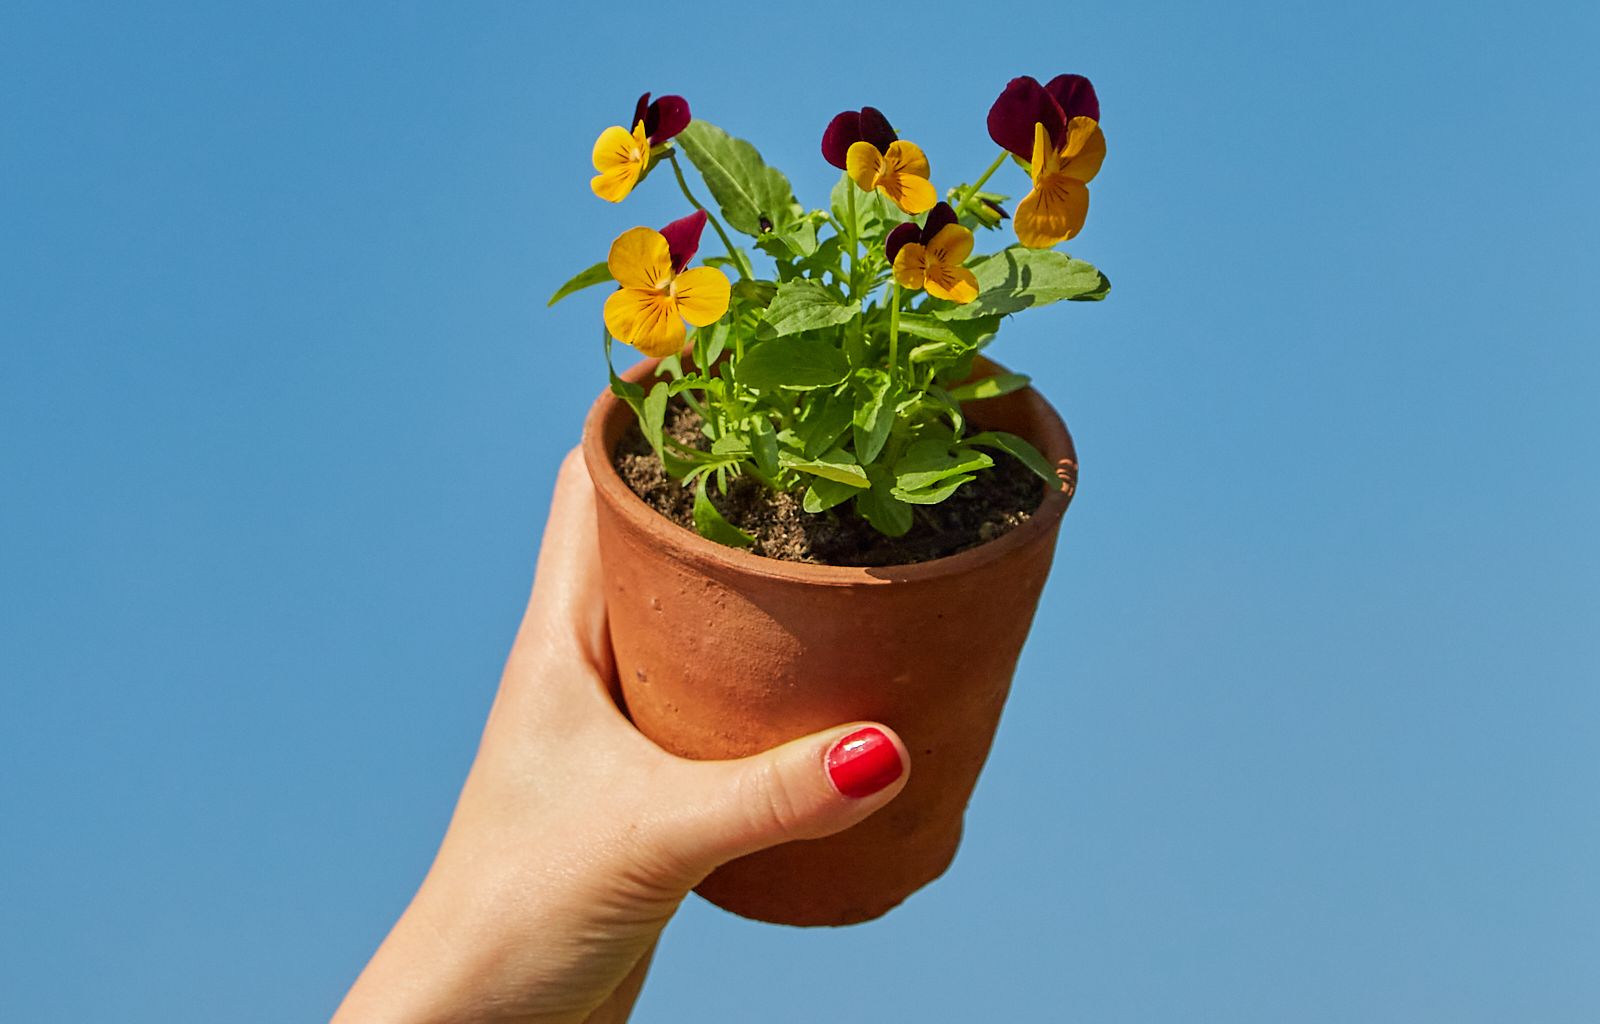 Person holding up flower pot against blue skies